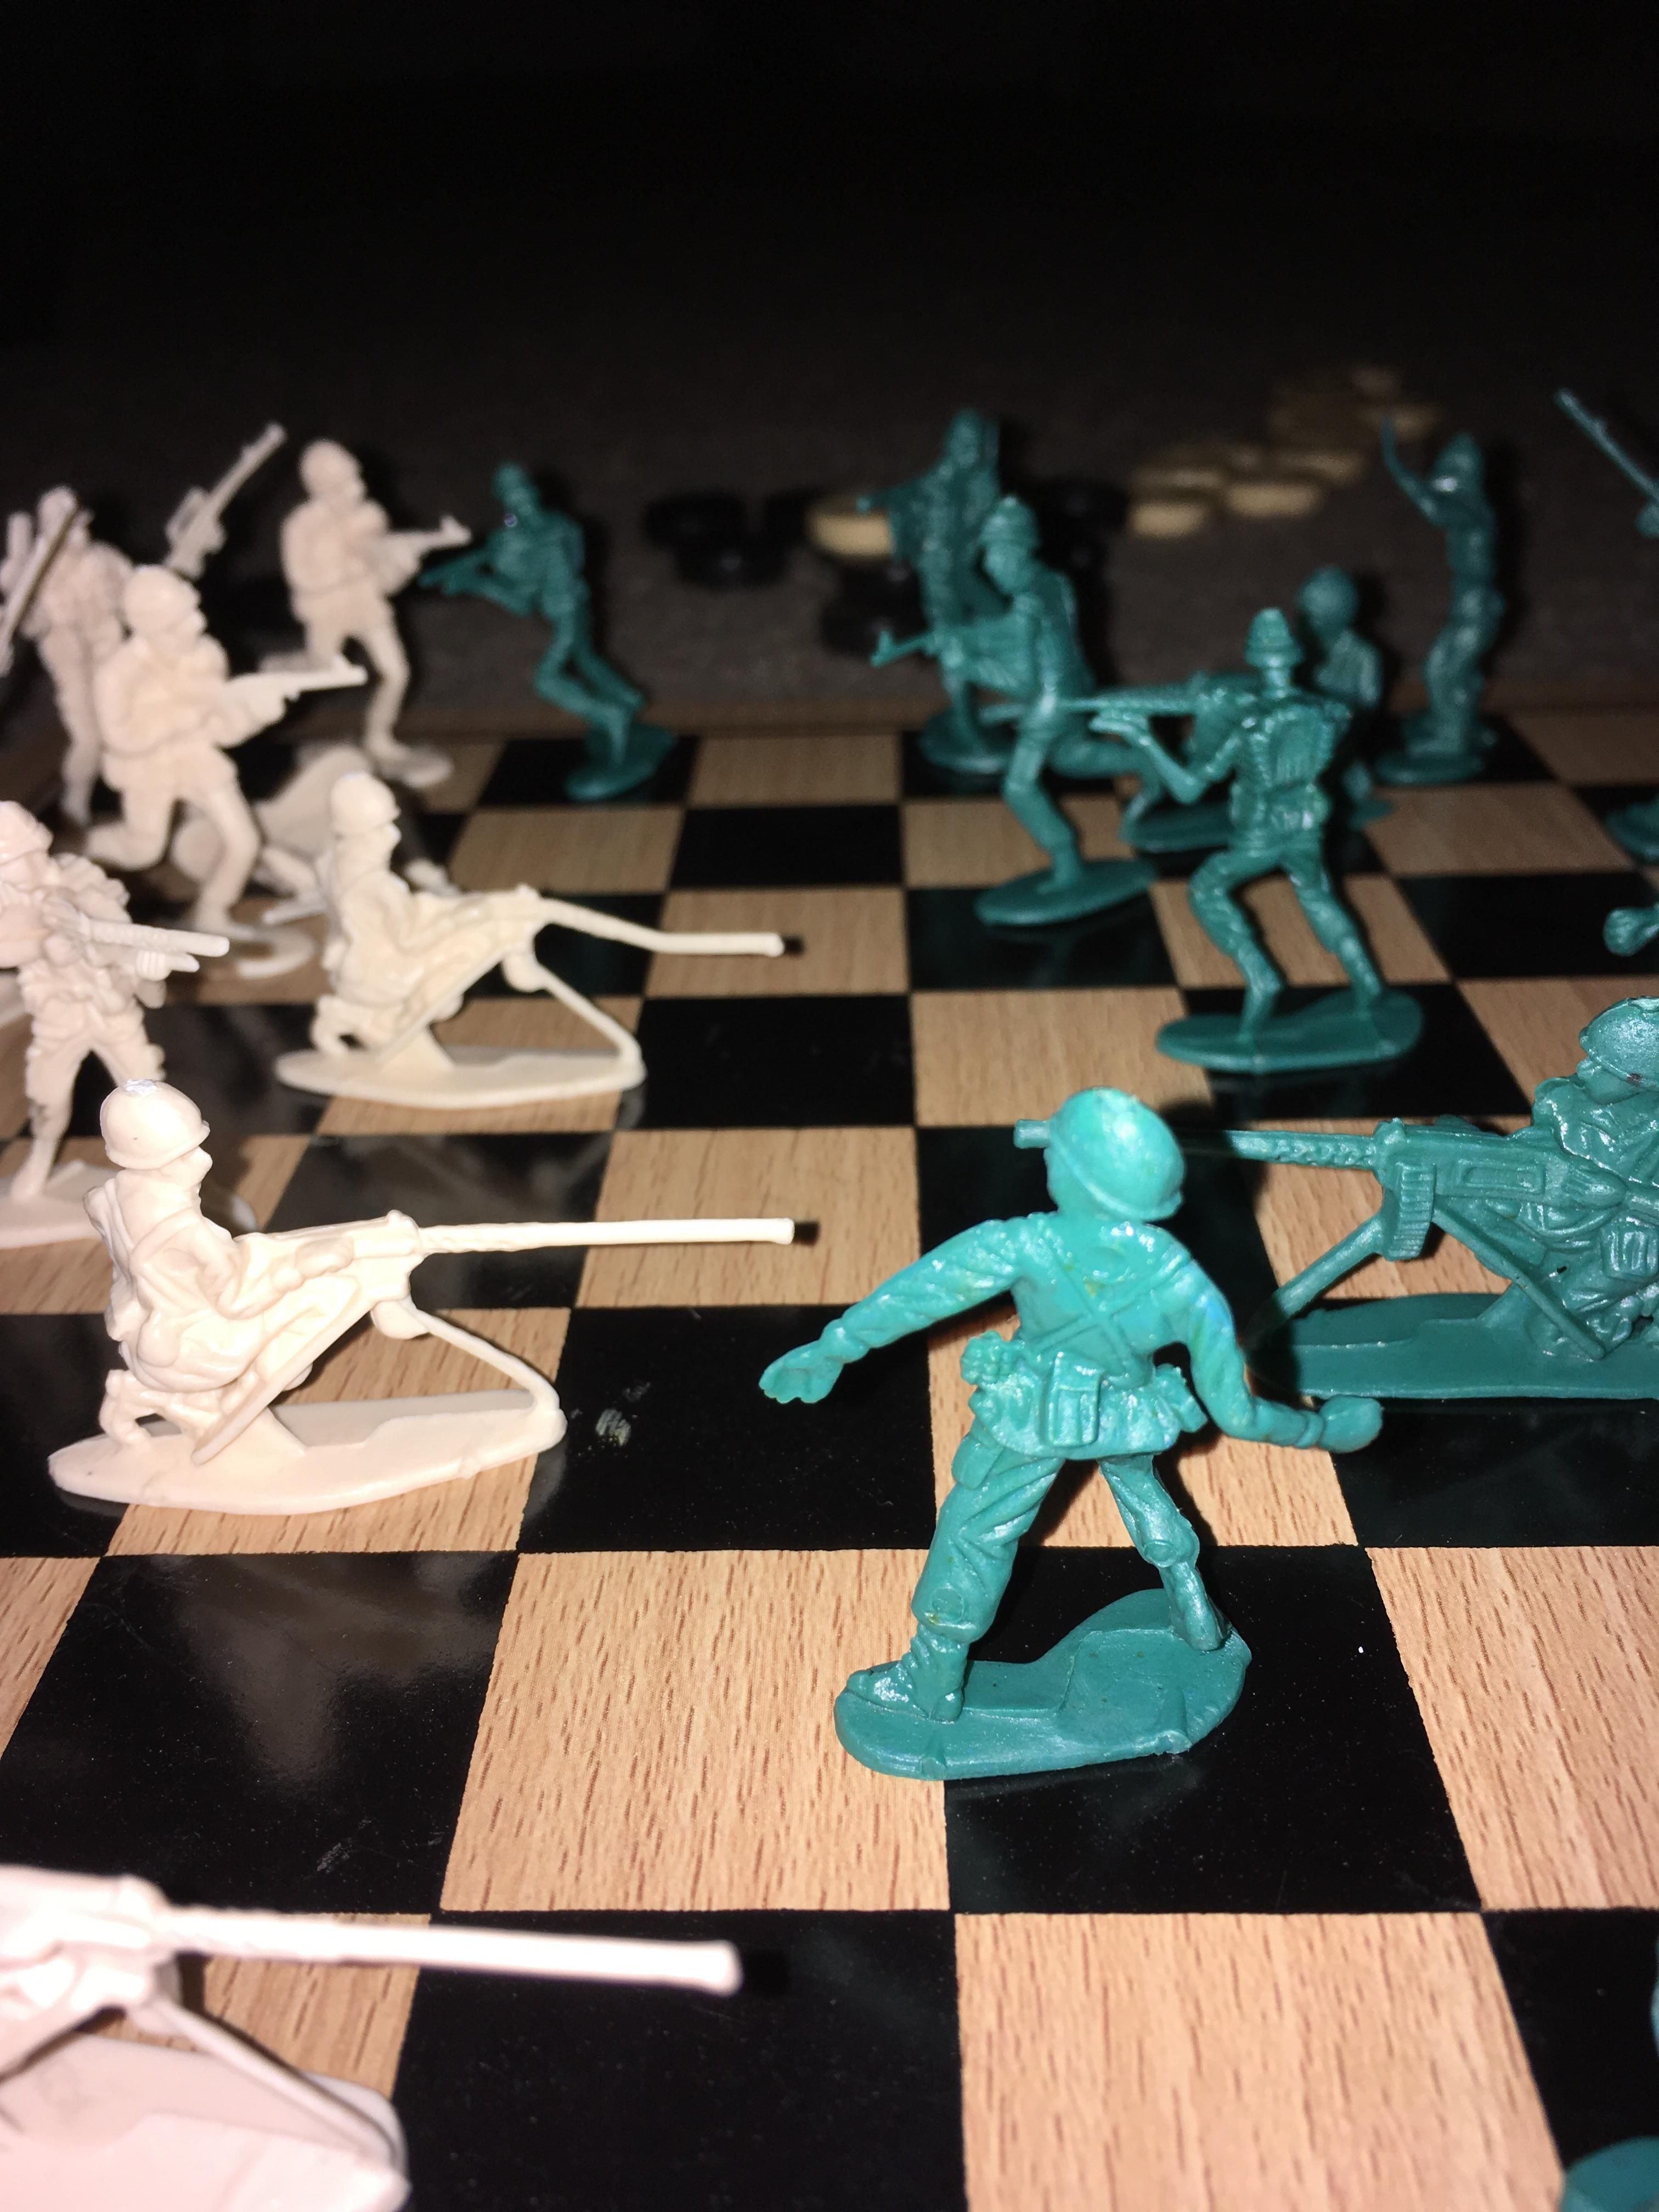 Army men chess with the son lol. His idea.